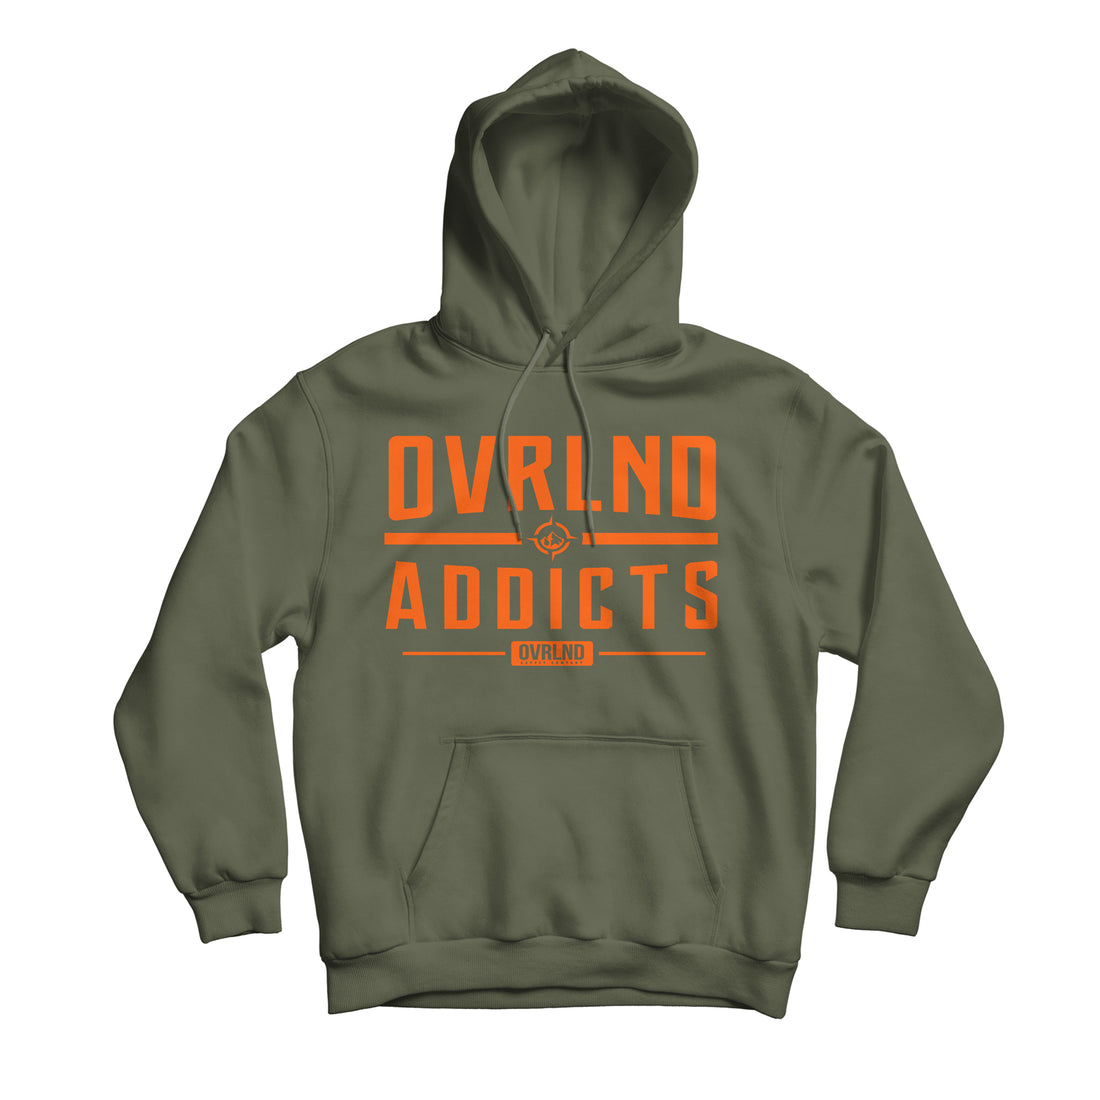 Unisex M&O Pullover Hoodie ~ Variety of Colors – Grouch Gear